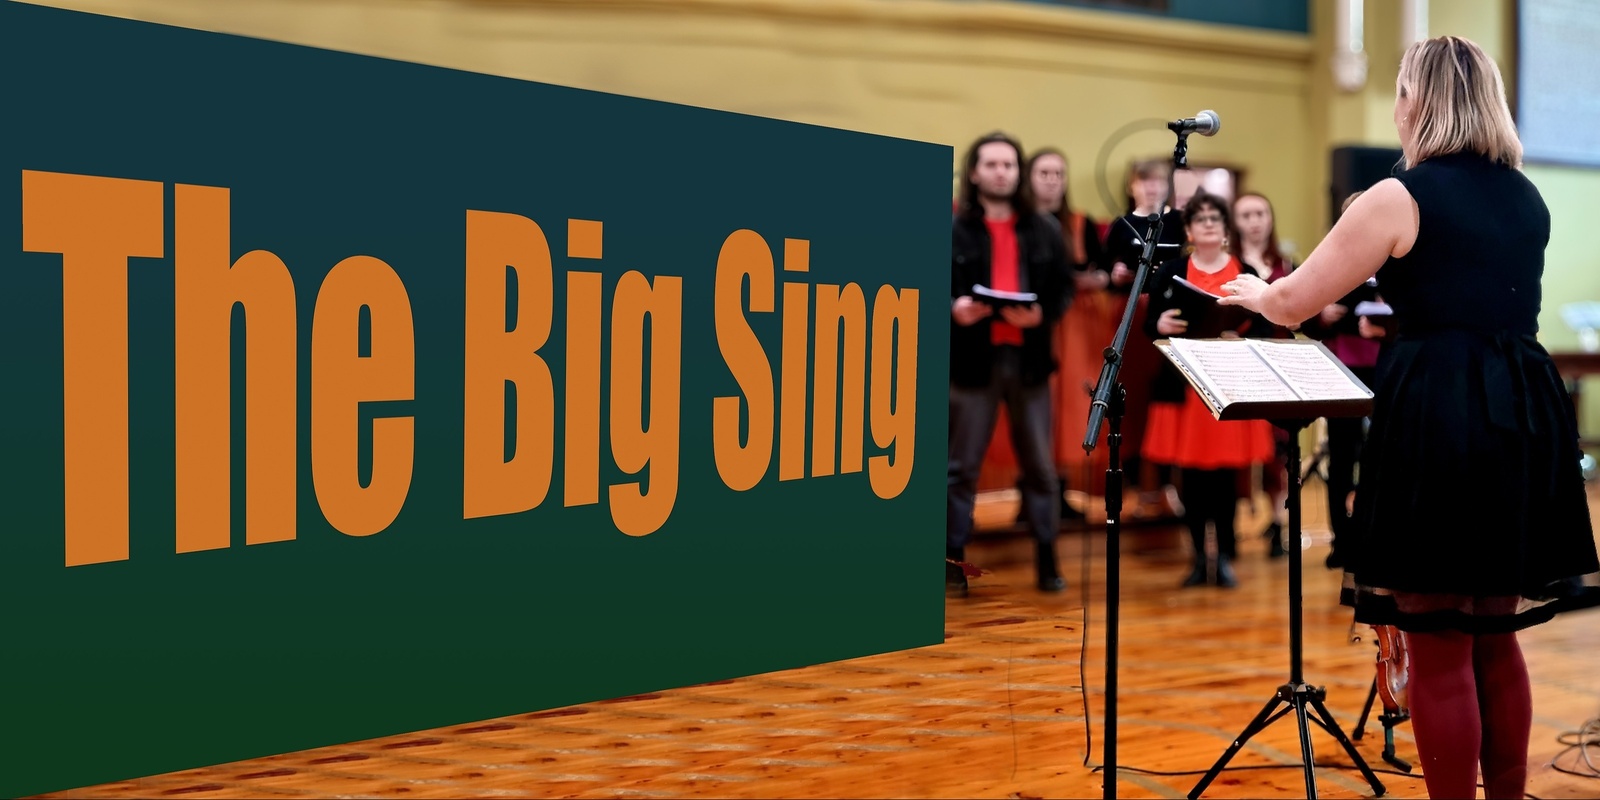 Banner image for The Big Sing